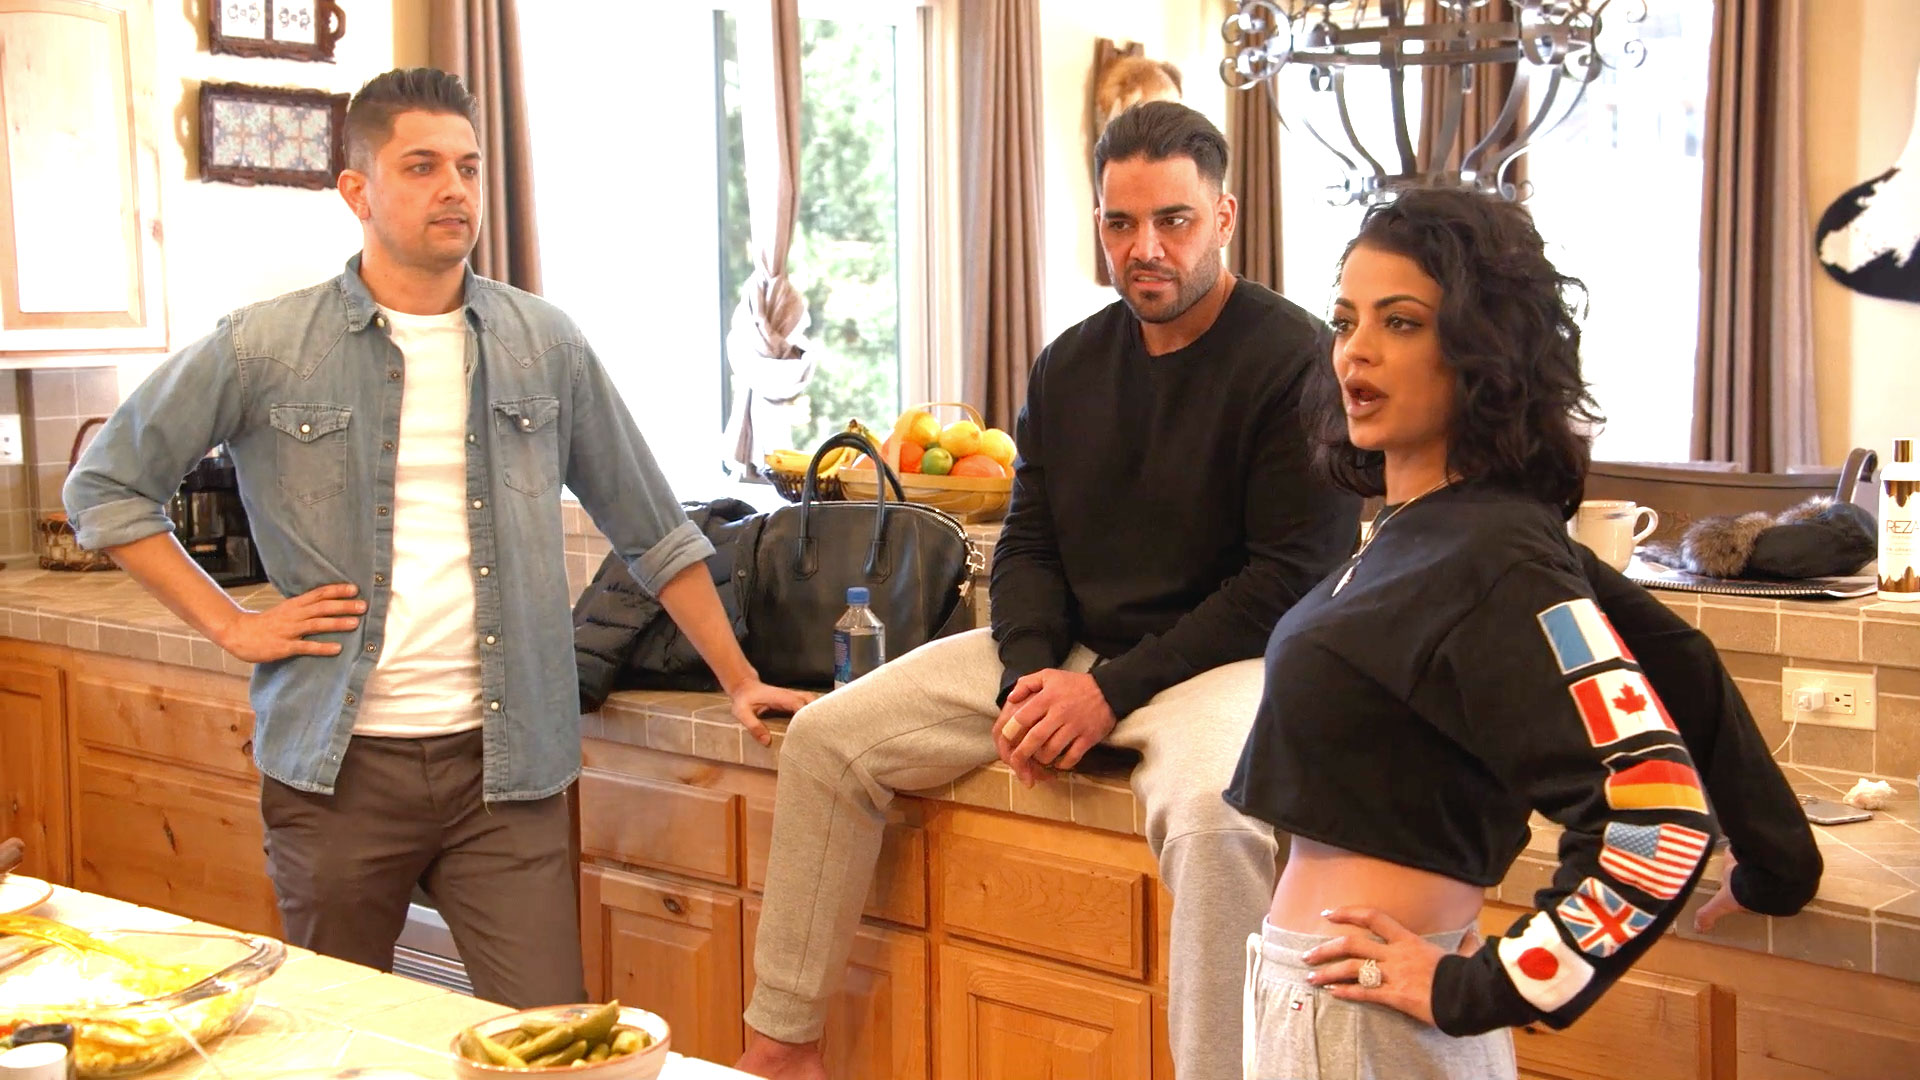 Watch A Short Kiss Goodnight (Season 7, Episode 1) of Shahs of Sunset or ge...